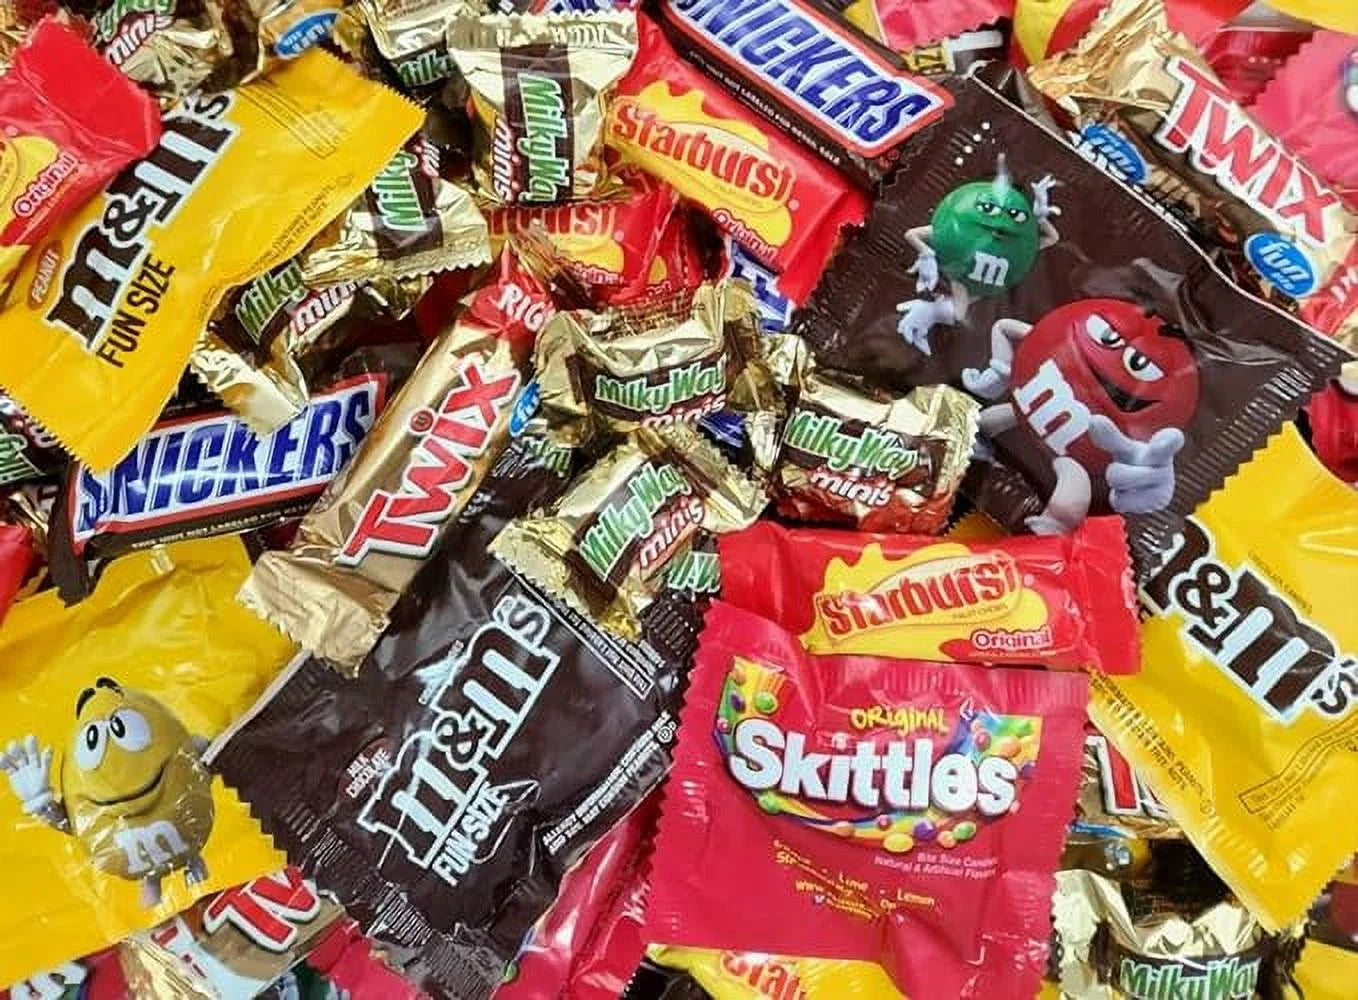 CANDYMAN 90 Oz. Chocolate Candy Bundle with M&M'S Milk Chocolate, M&M'S Peanut, Skittles, Starburst, Snickers, Milky Way & Twix Individually Wrapped Candy